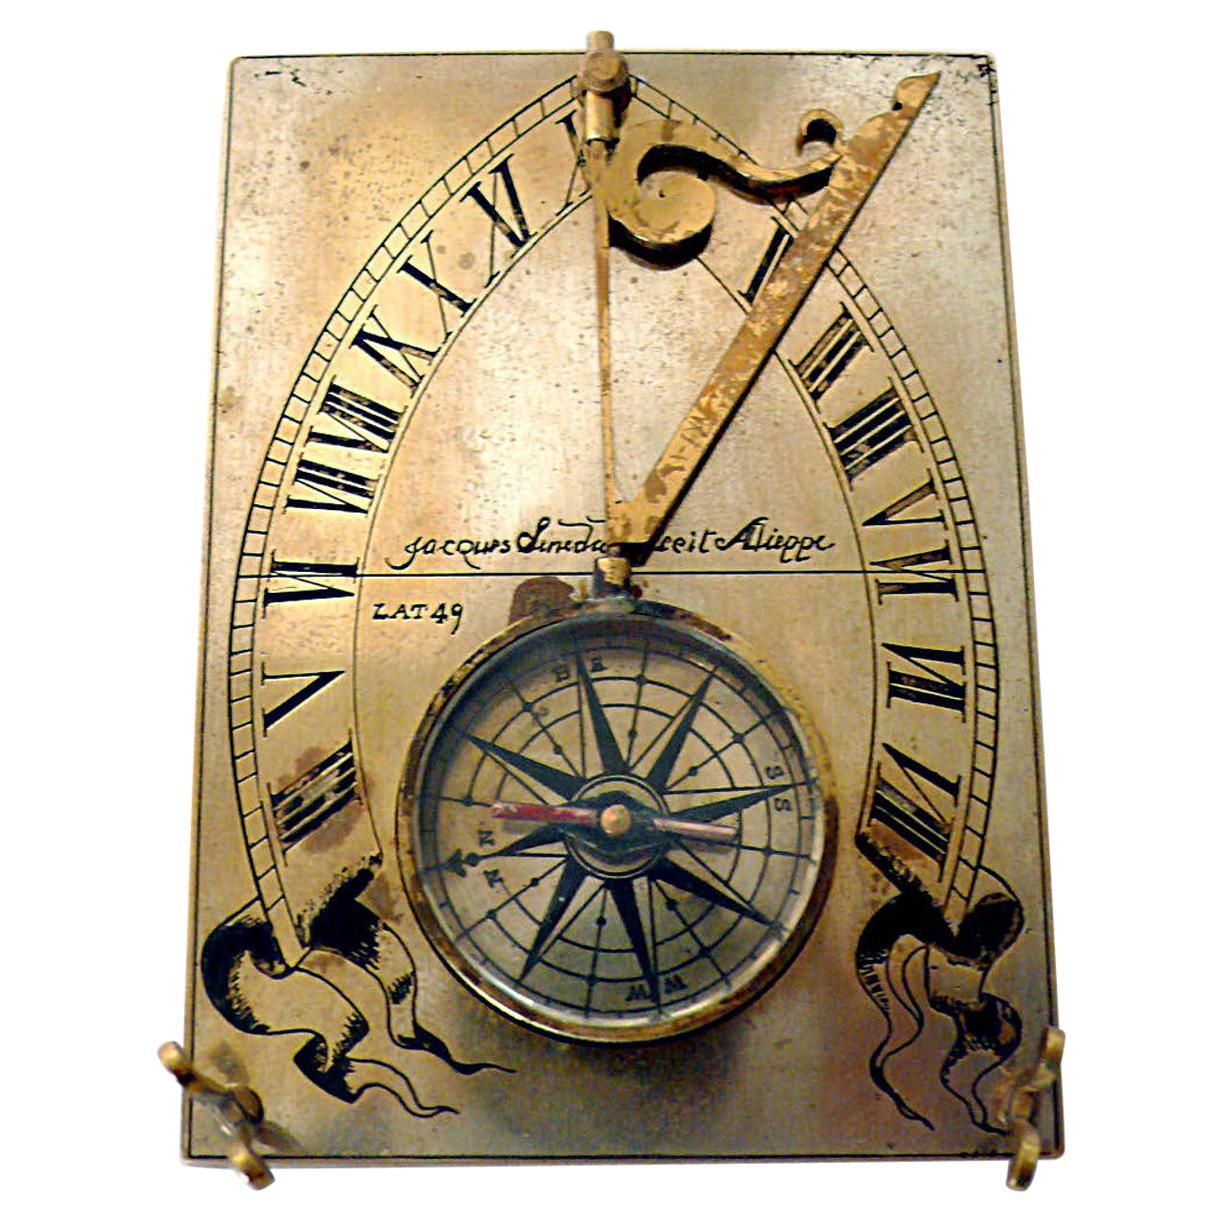 19th Century Compass Sundial, Jacque Linedal, Dieppe France